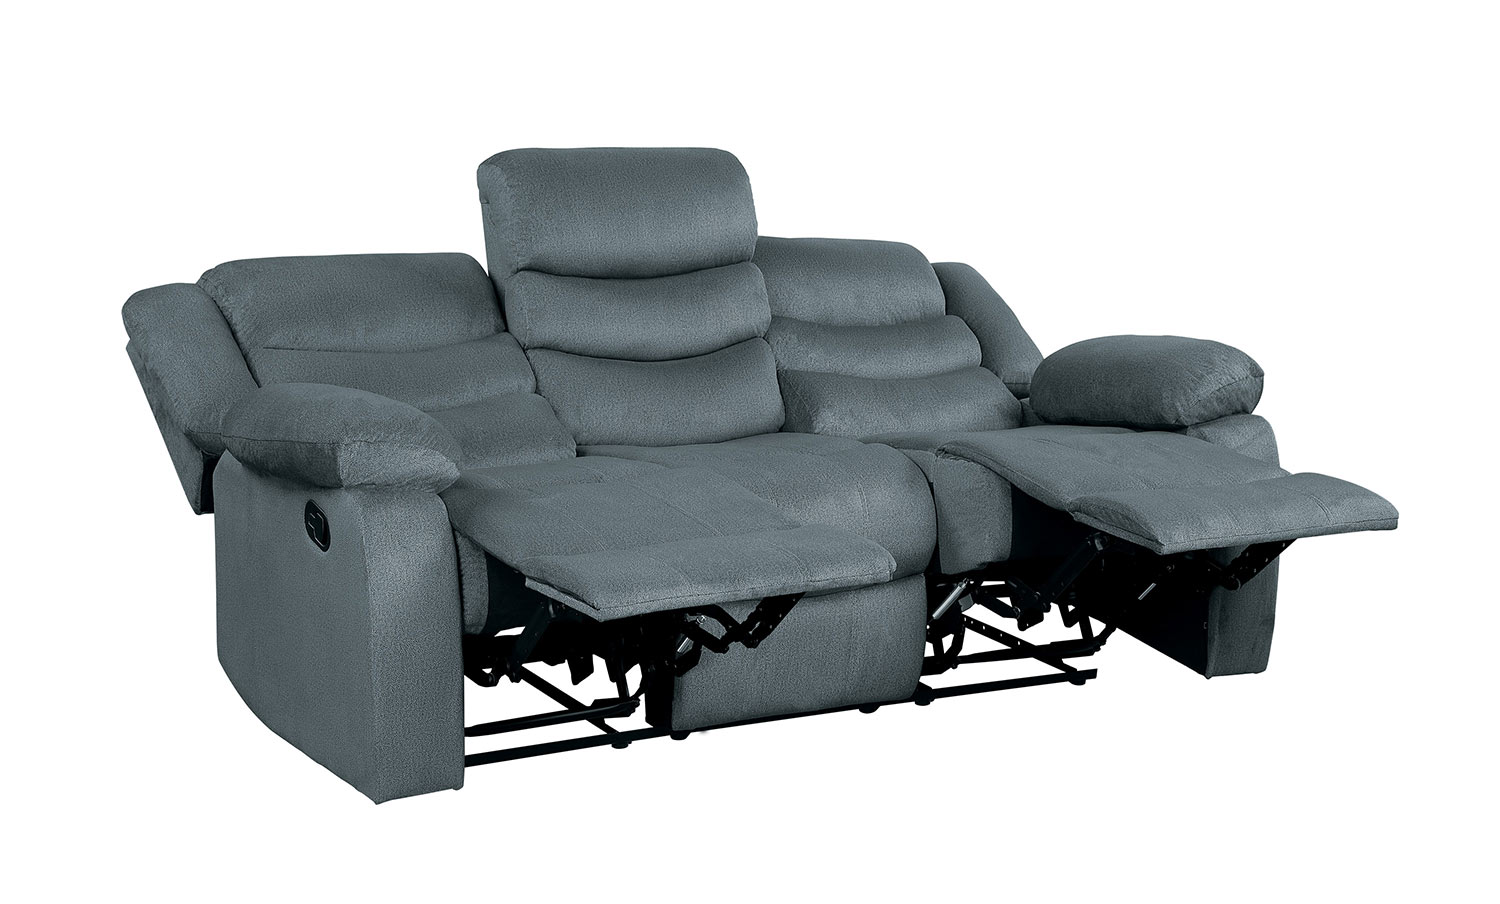 Homelegance Discus Double Reclining Sofa - Gray